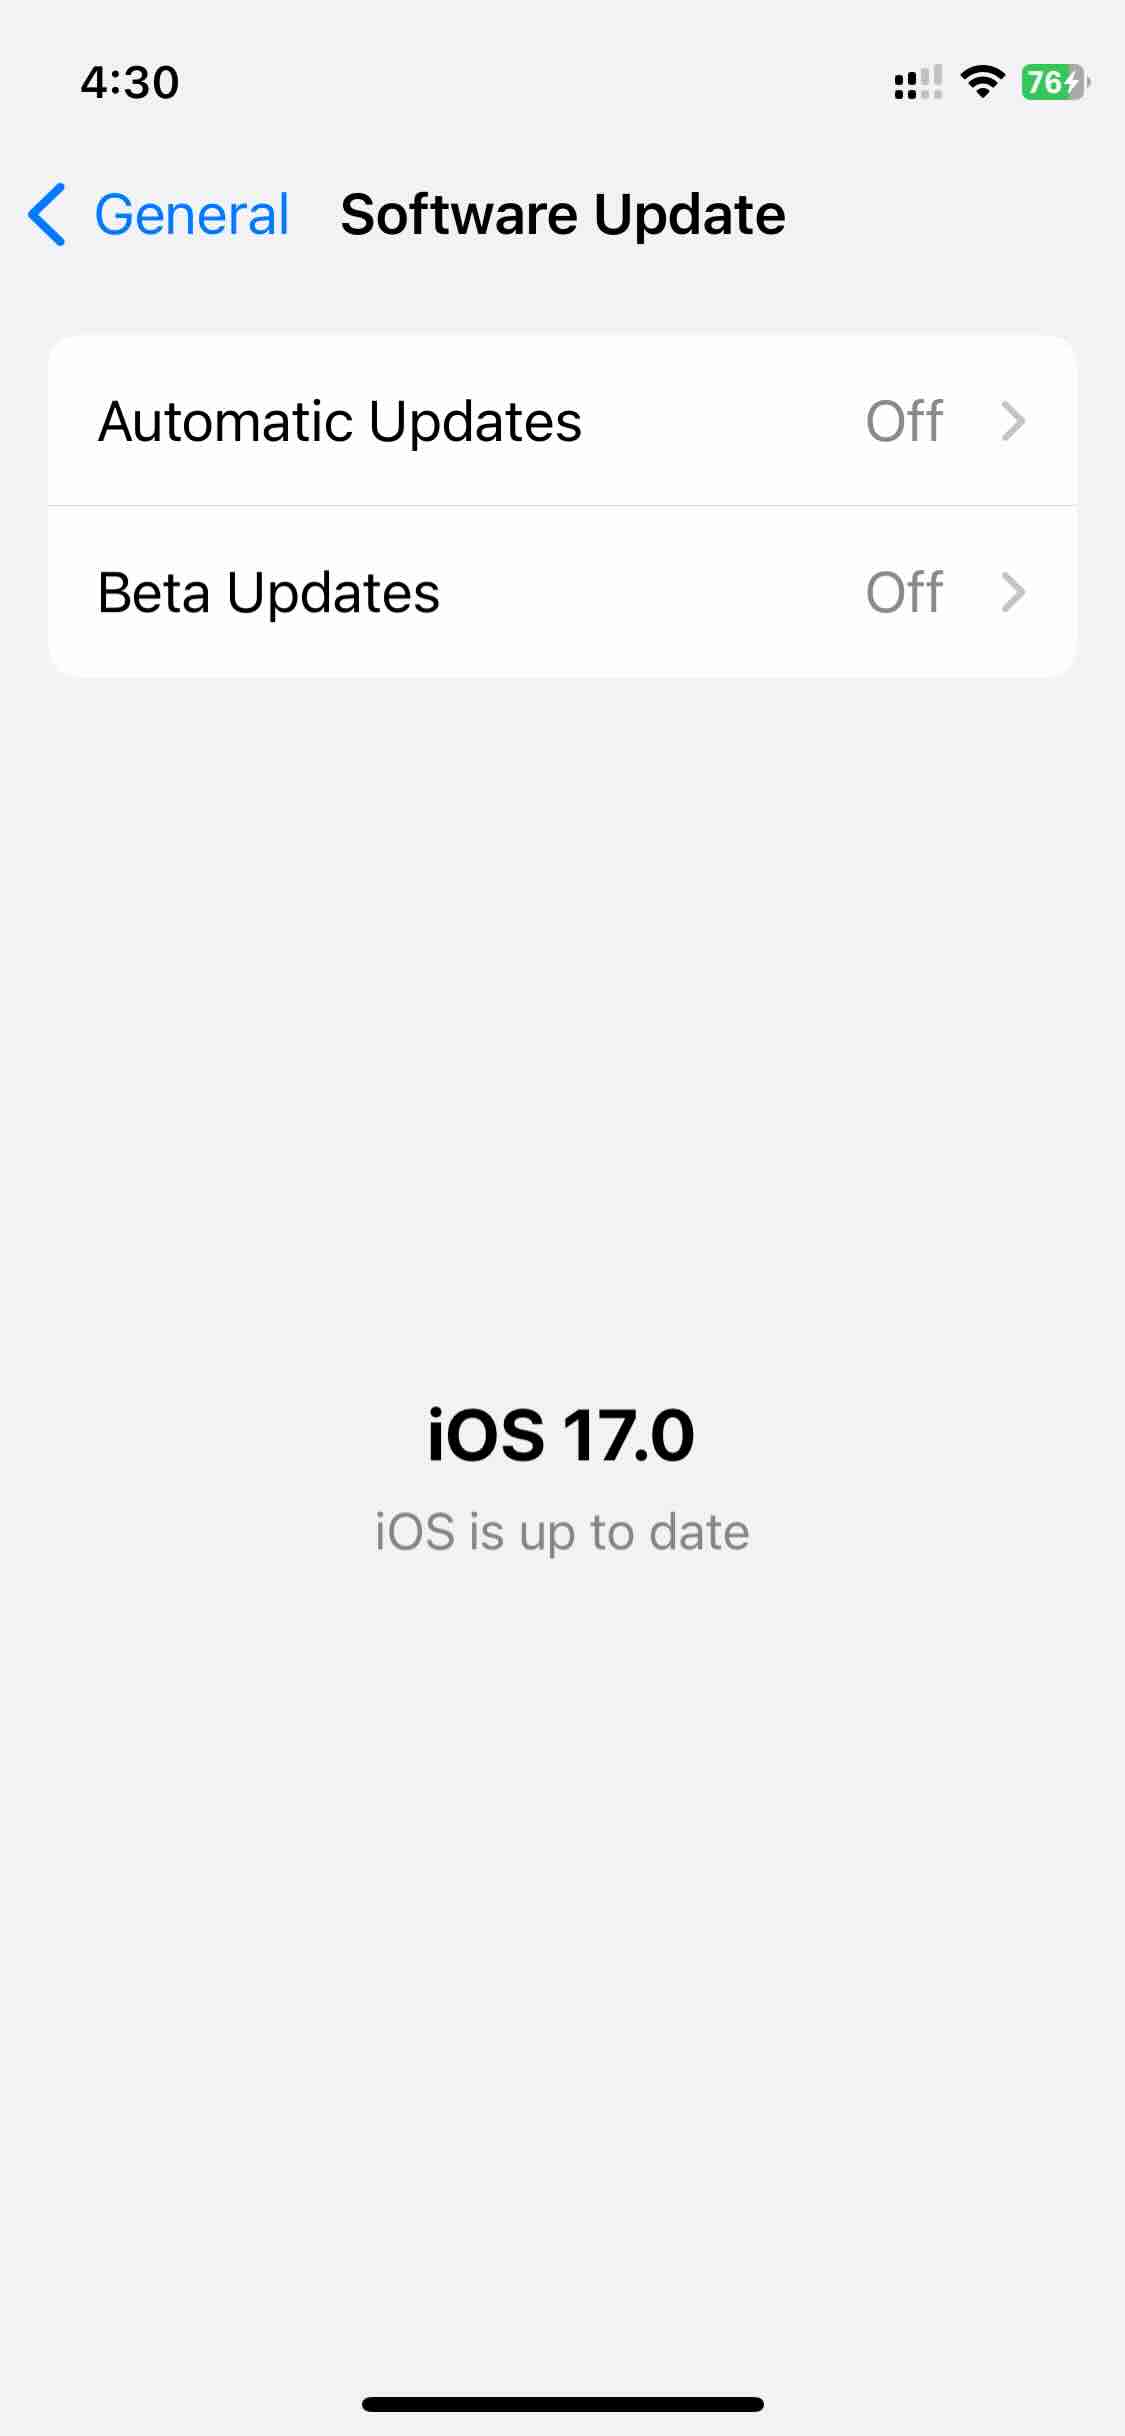 iOS 17 is up to date